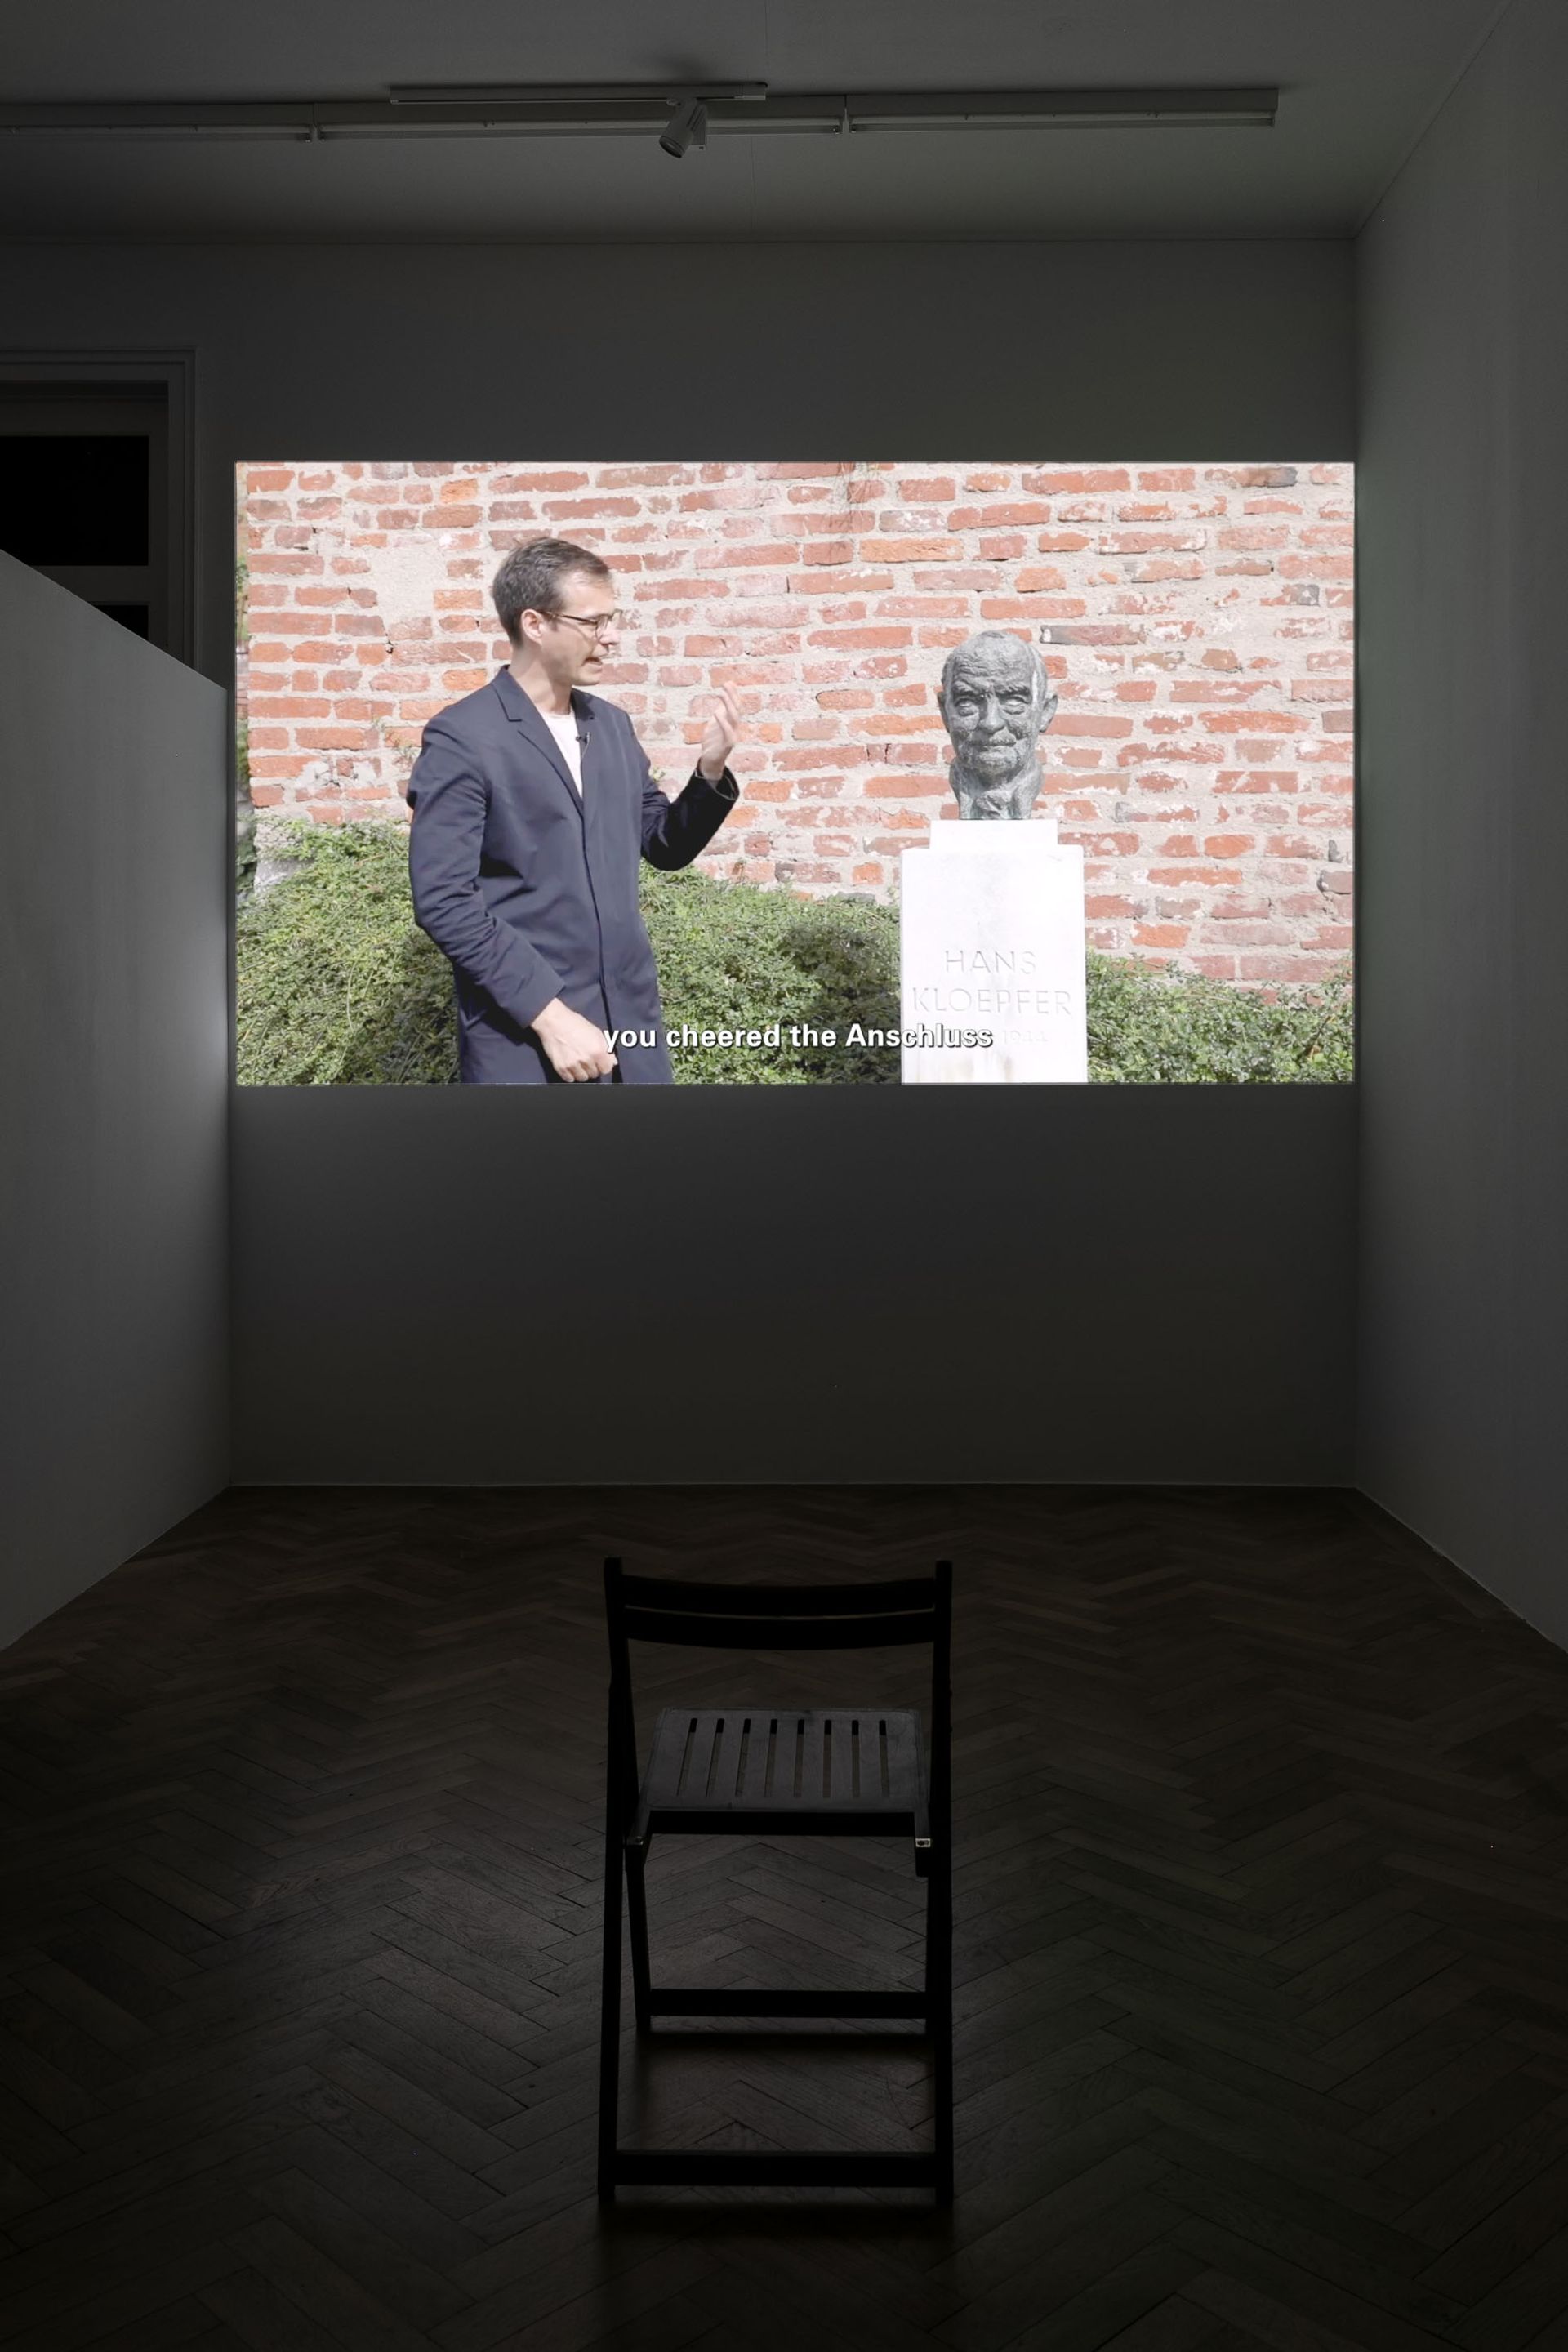 Exhibition view: Thomas Geiger, “The Ghost is present”, 2021, photo: Sebastian Kissel